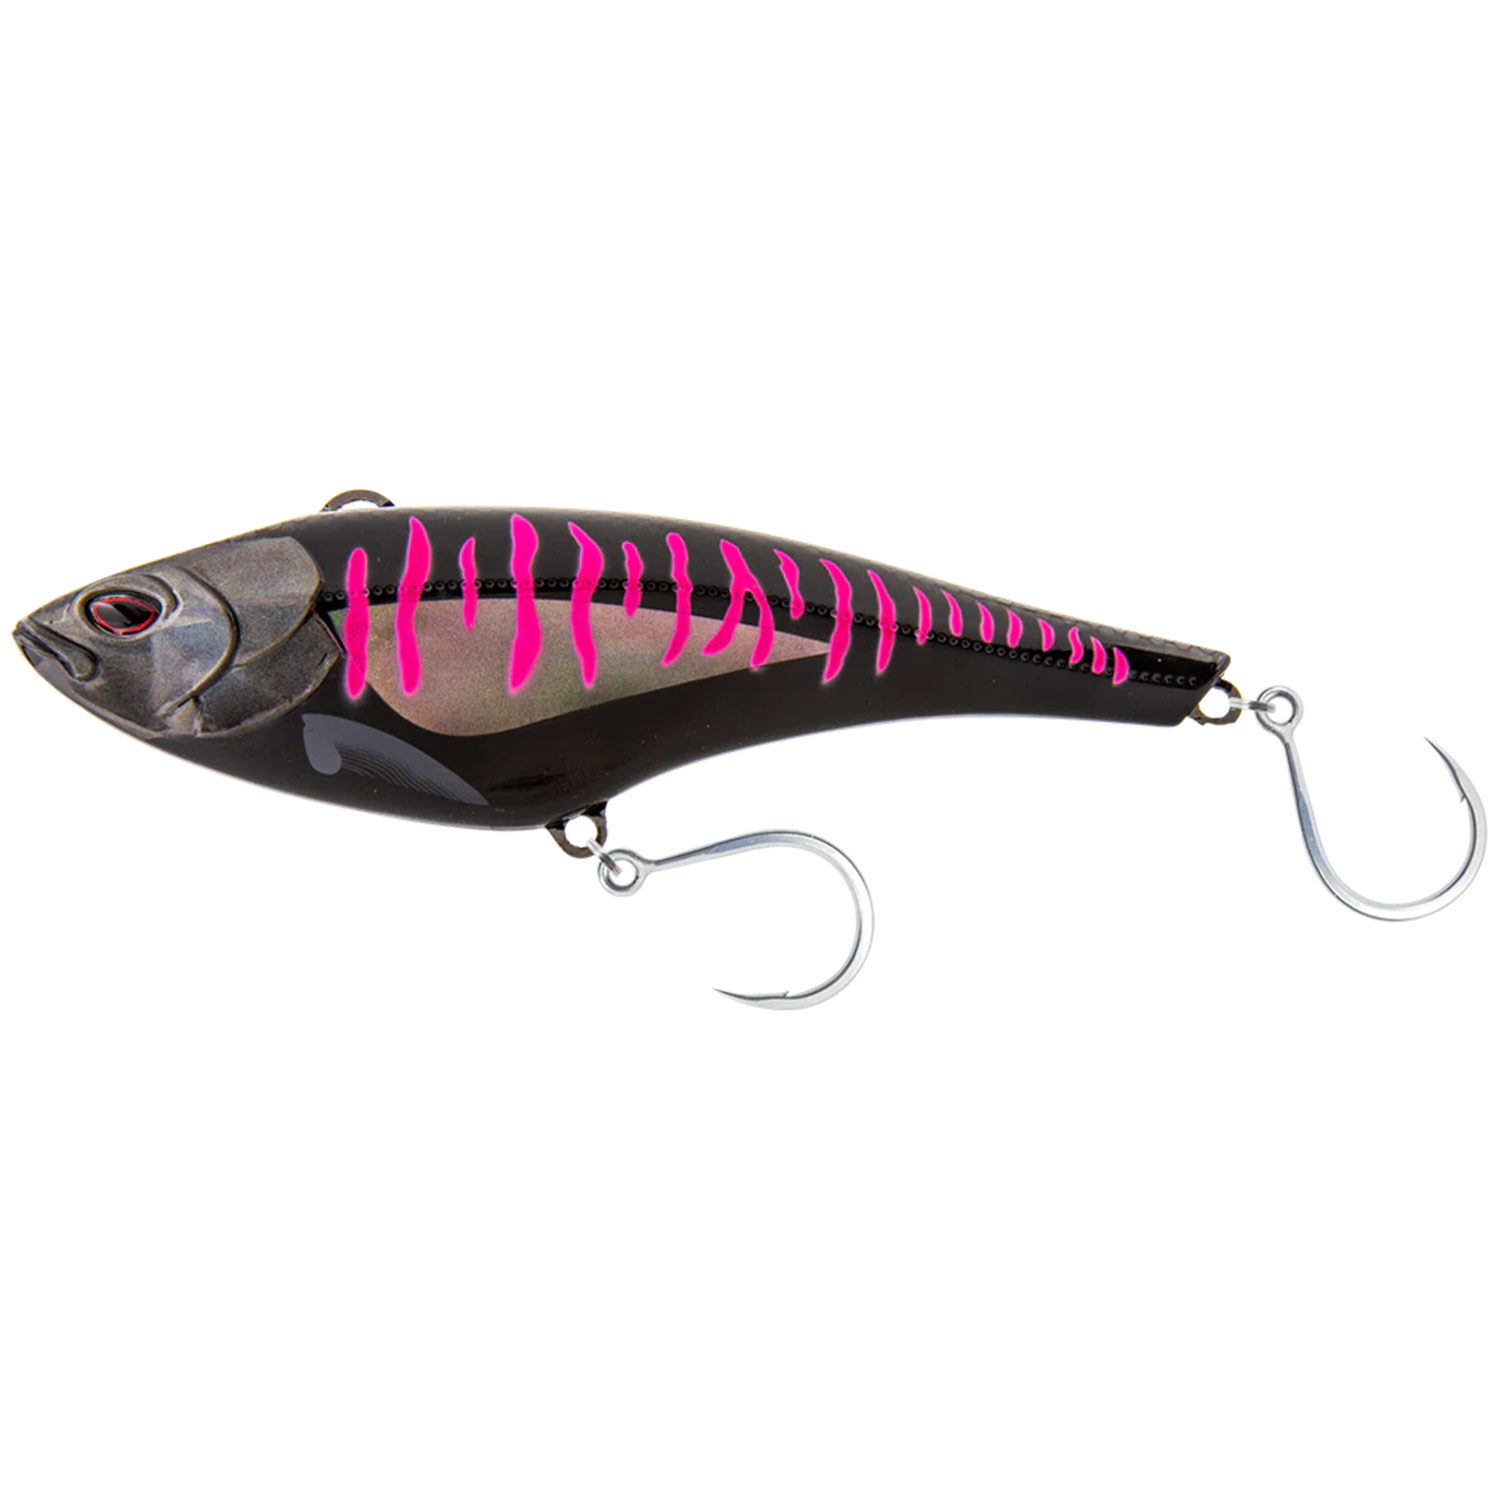 NOMAD DESIGN 8 Madmacs 200 Sinking High Speed Trolling Lure, 11 1/4 Ounces